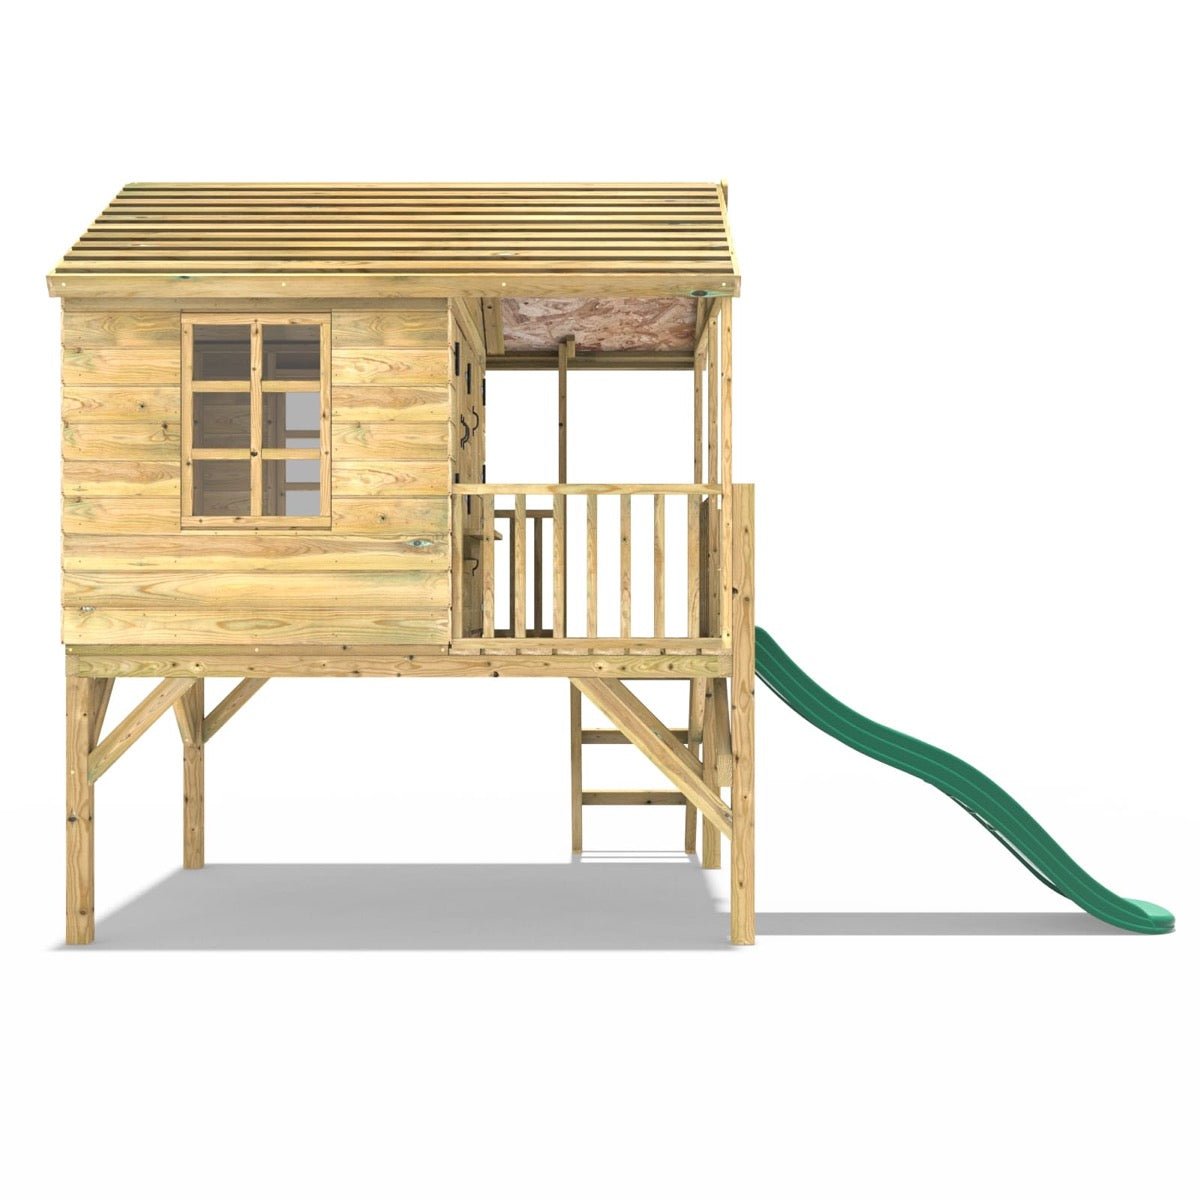 Rebo 5FT x 5FT Childrens Wooden Garden Playhouse on Deck with 6ft Slide - Falcon Green